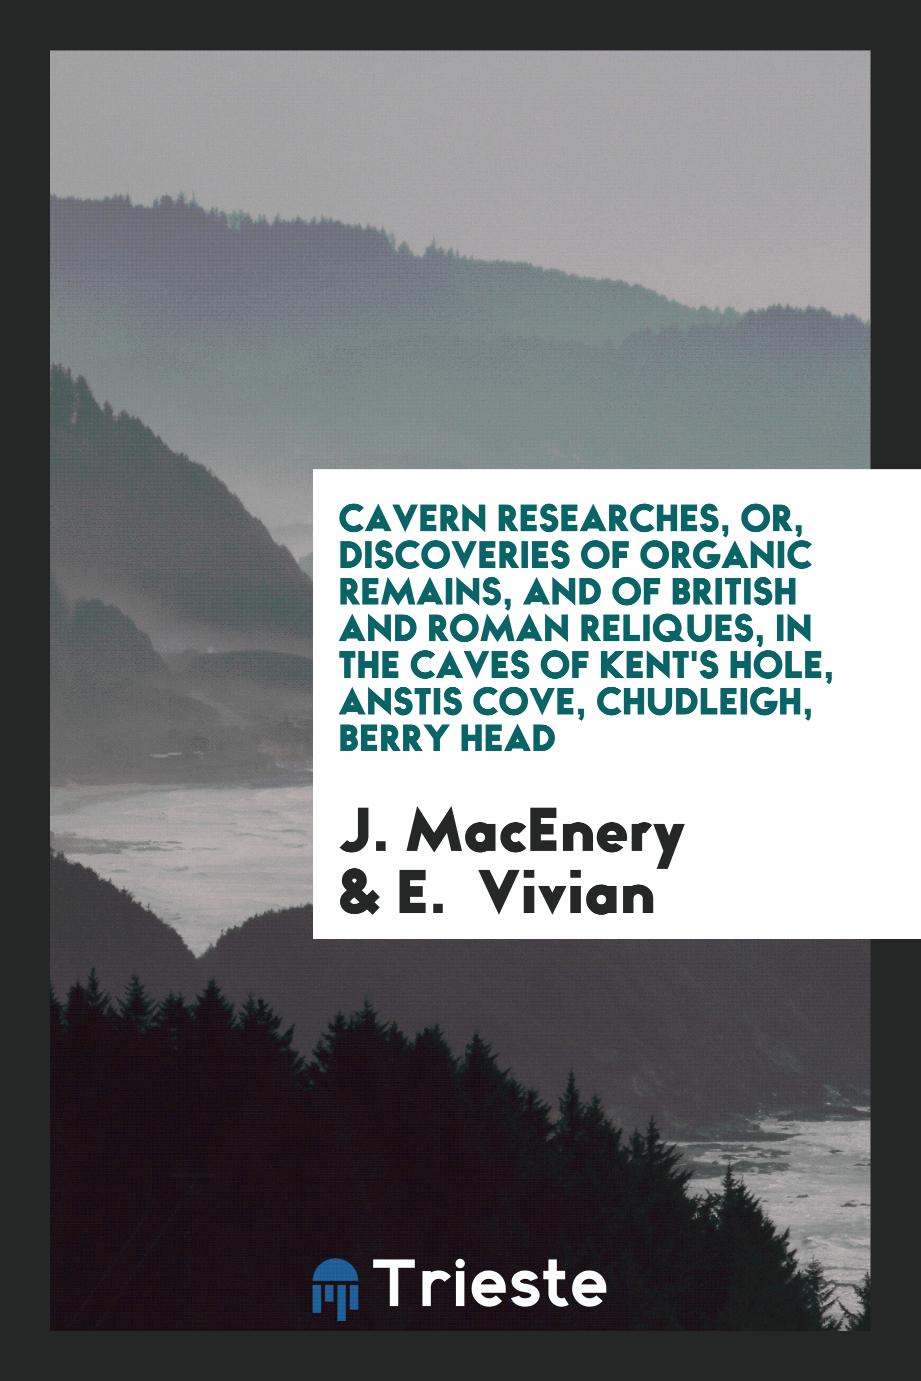 Cavern researches, or, Discoveries of organic remains, and of British and Roman reliques, in the caves of Kent's Hole, Anstis Cove, Chudleigh, Berry Head